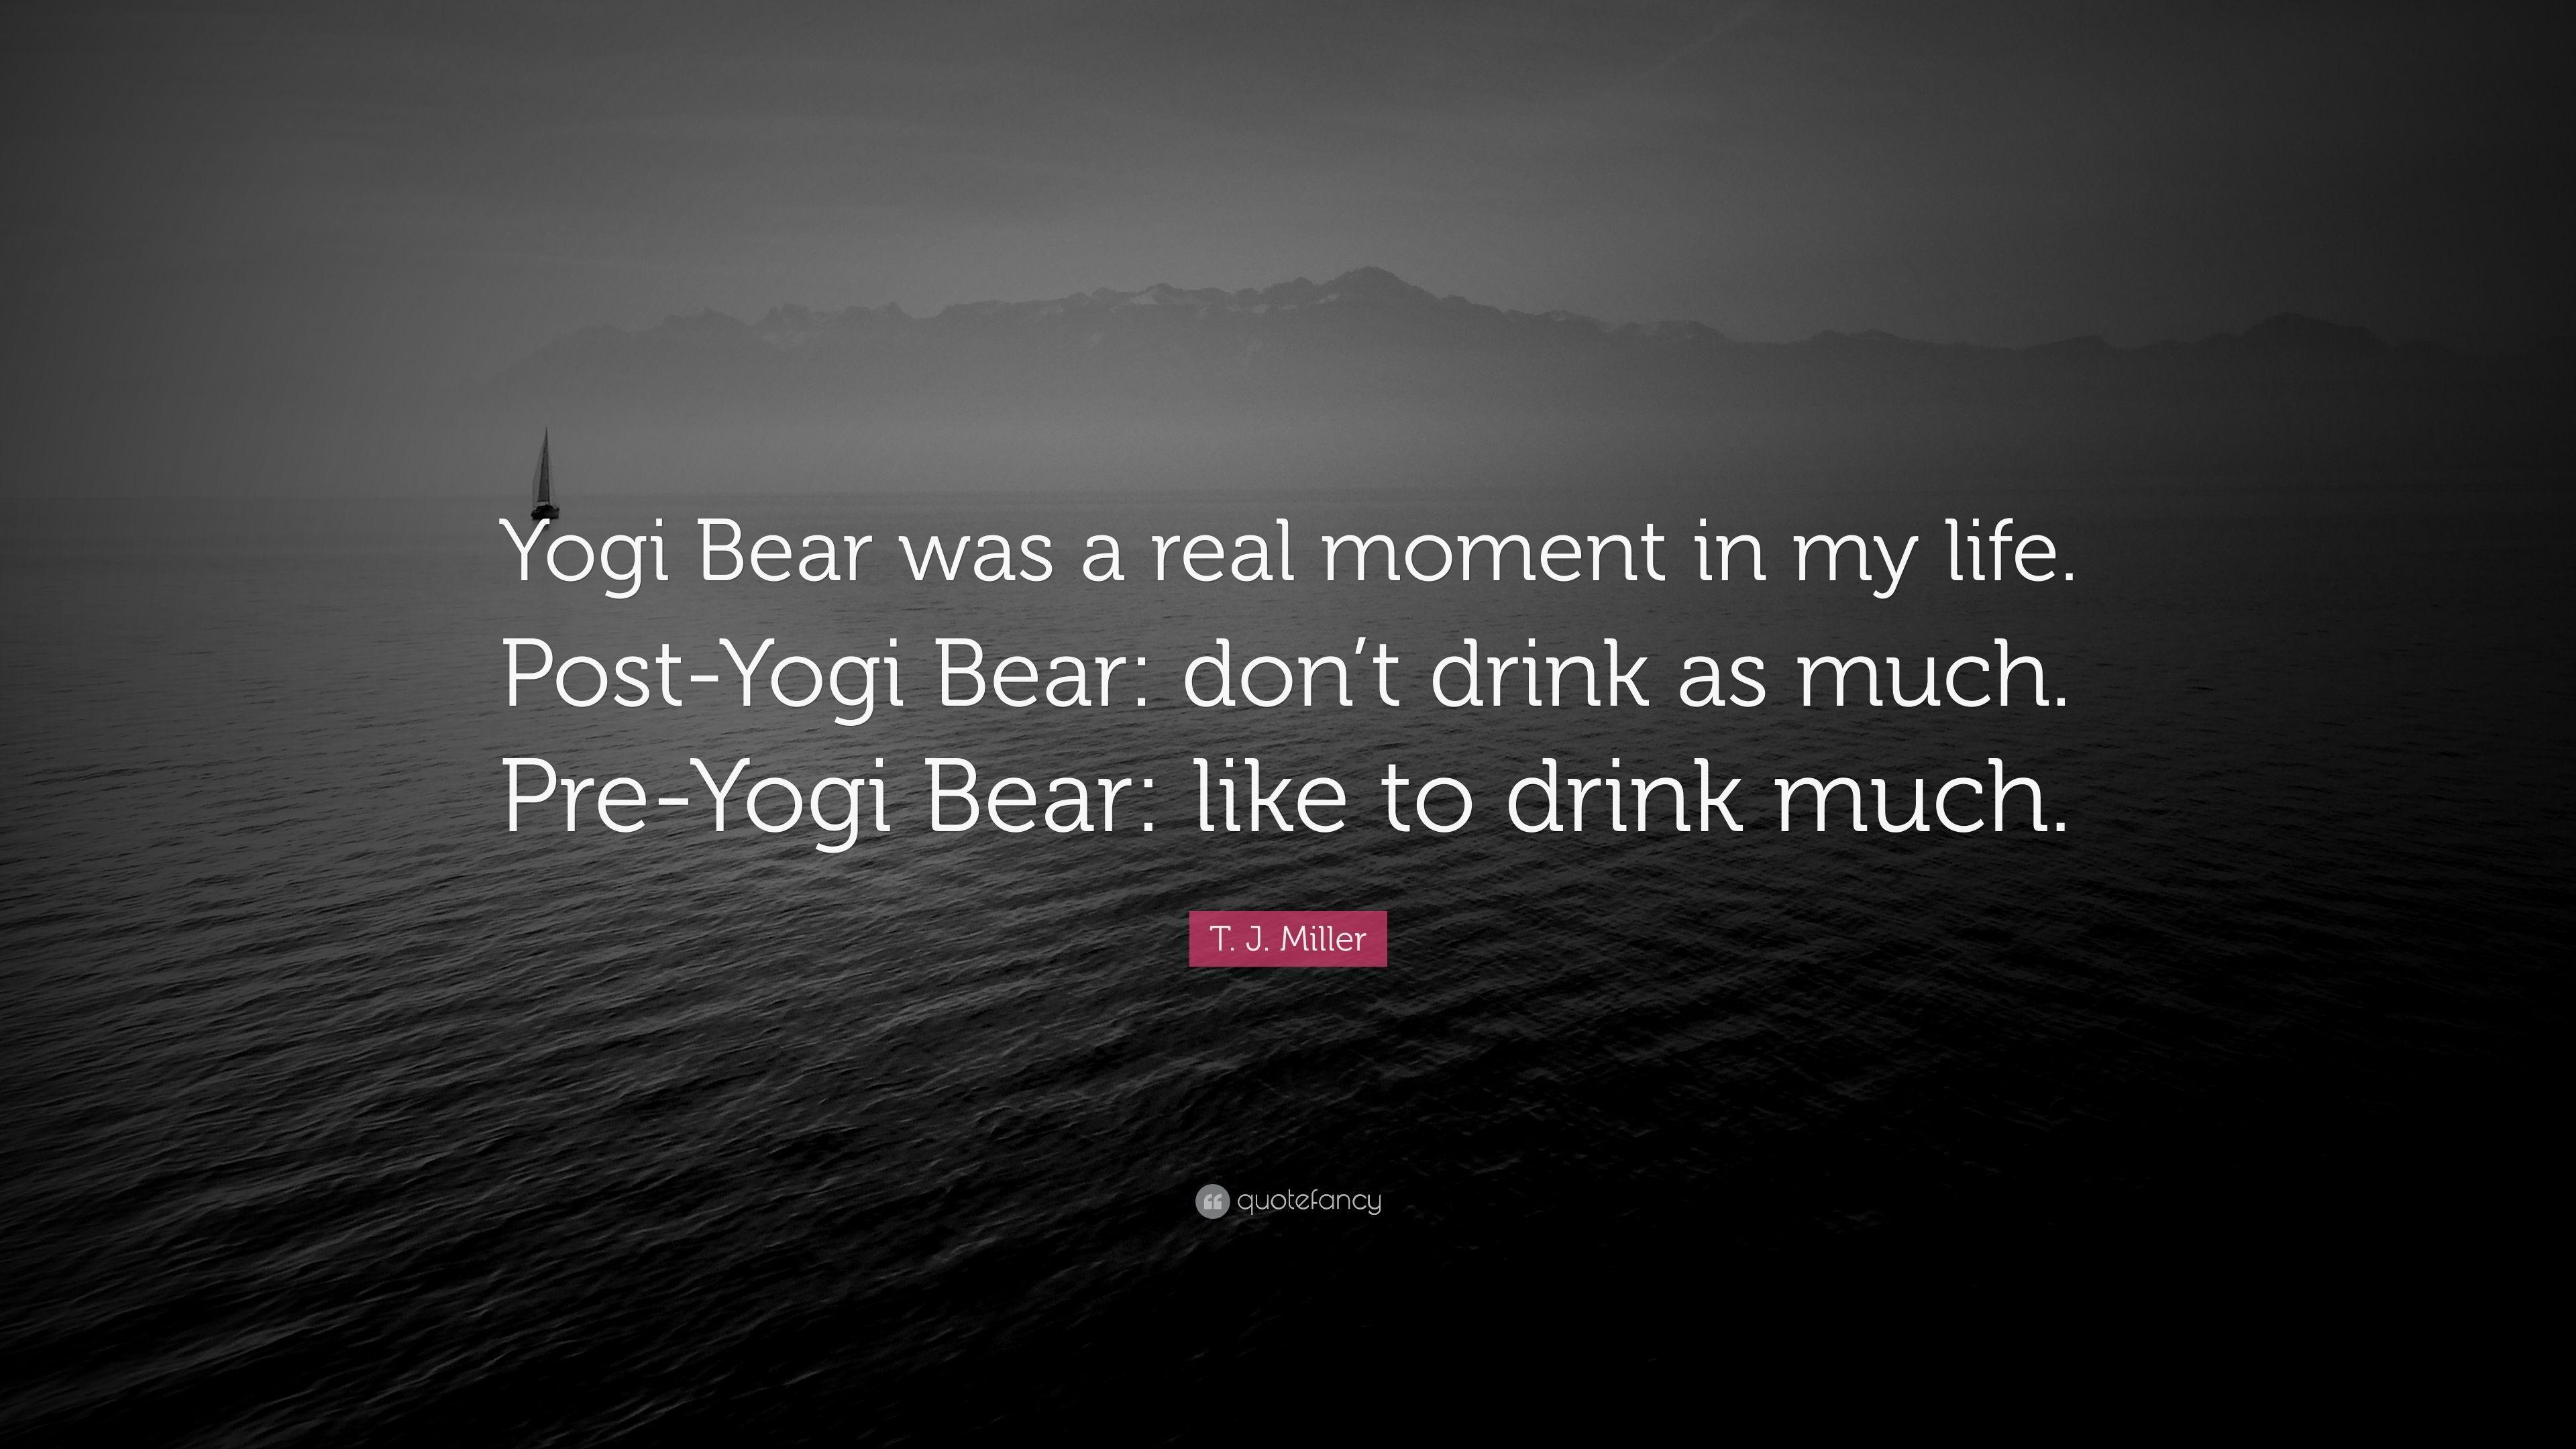 T. J. Miller Quote: “Yogi Bear was a real moment in my life. Post